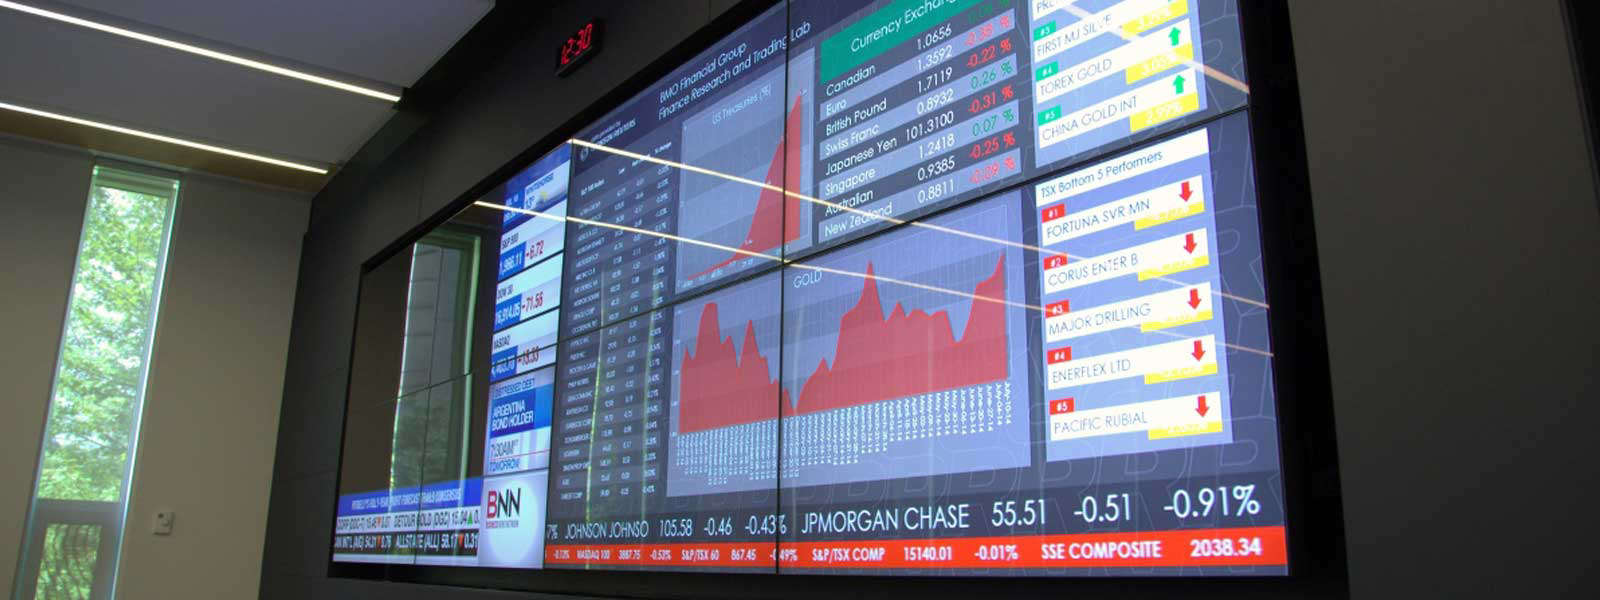 Multiple screens combined to display stock market data